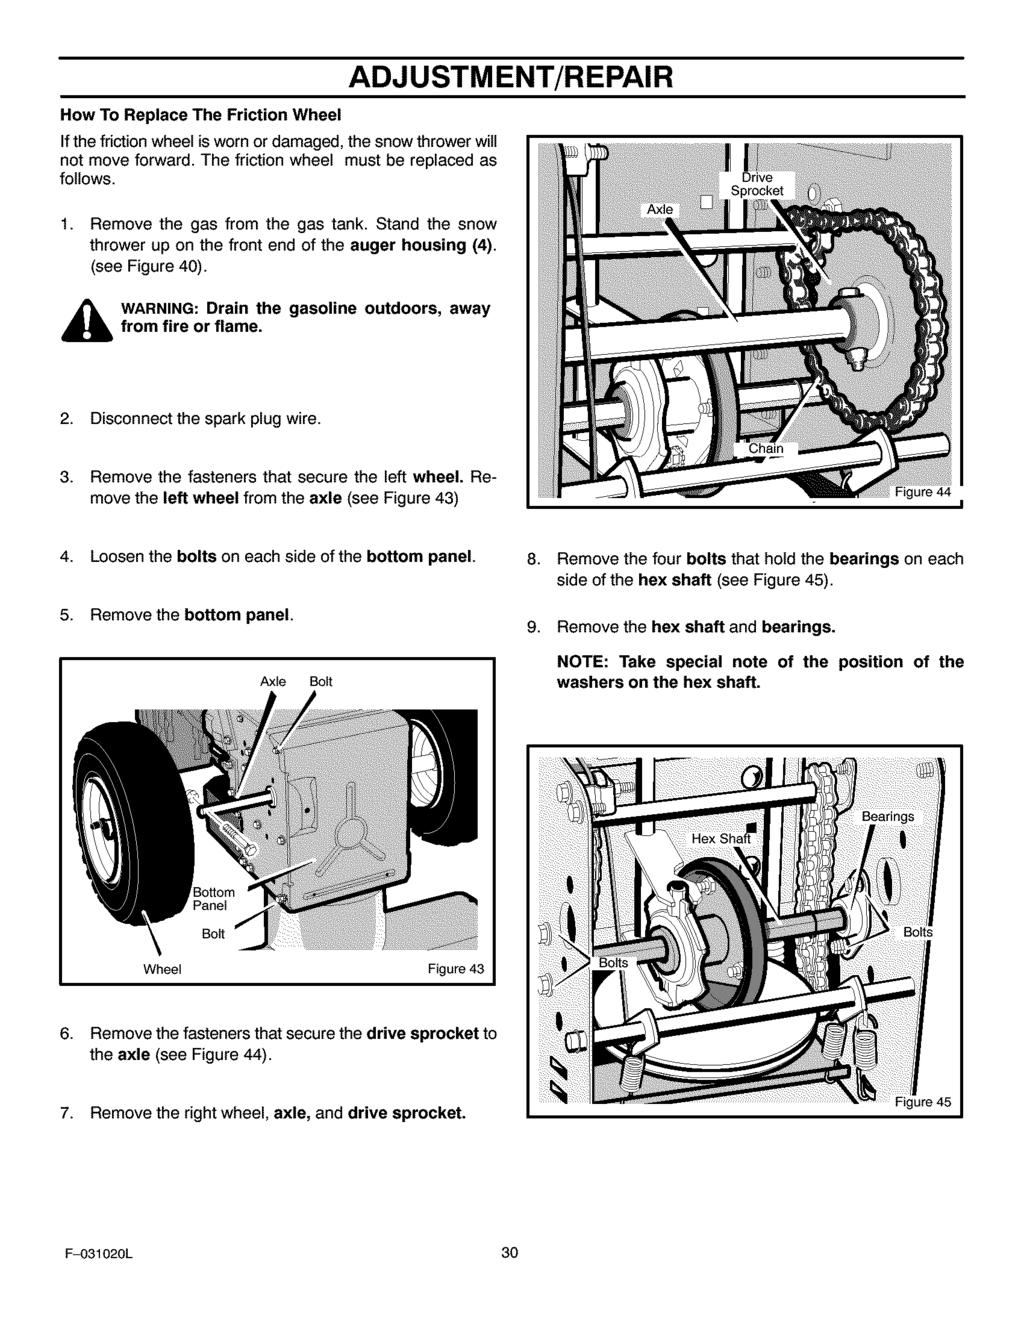 ADJUSTMENT/REPAIR How To Replace The Friction Wheel If the friction wheel is worn or damaged, the snow thrower will not move forward. The friction wheel must be replaced as follows. 1.